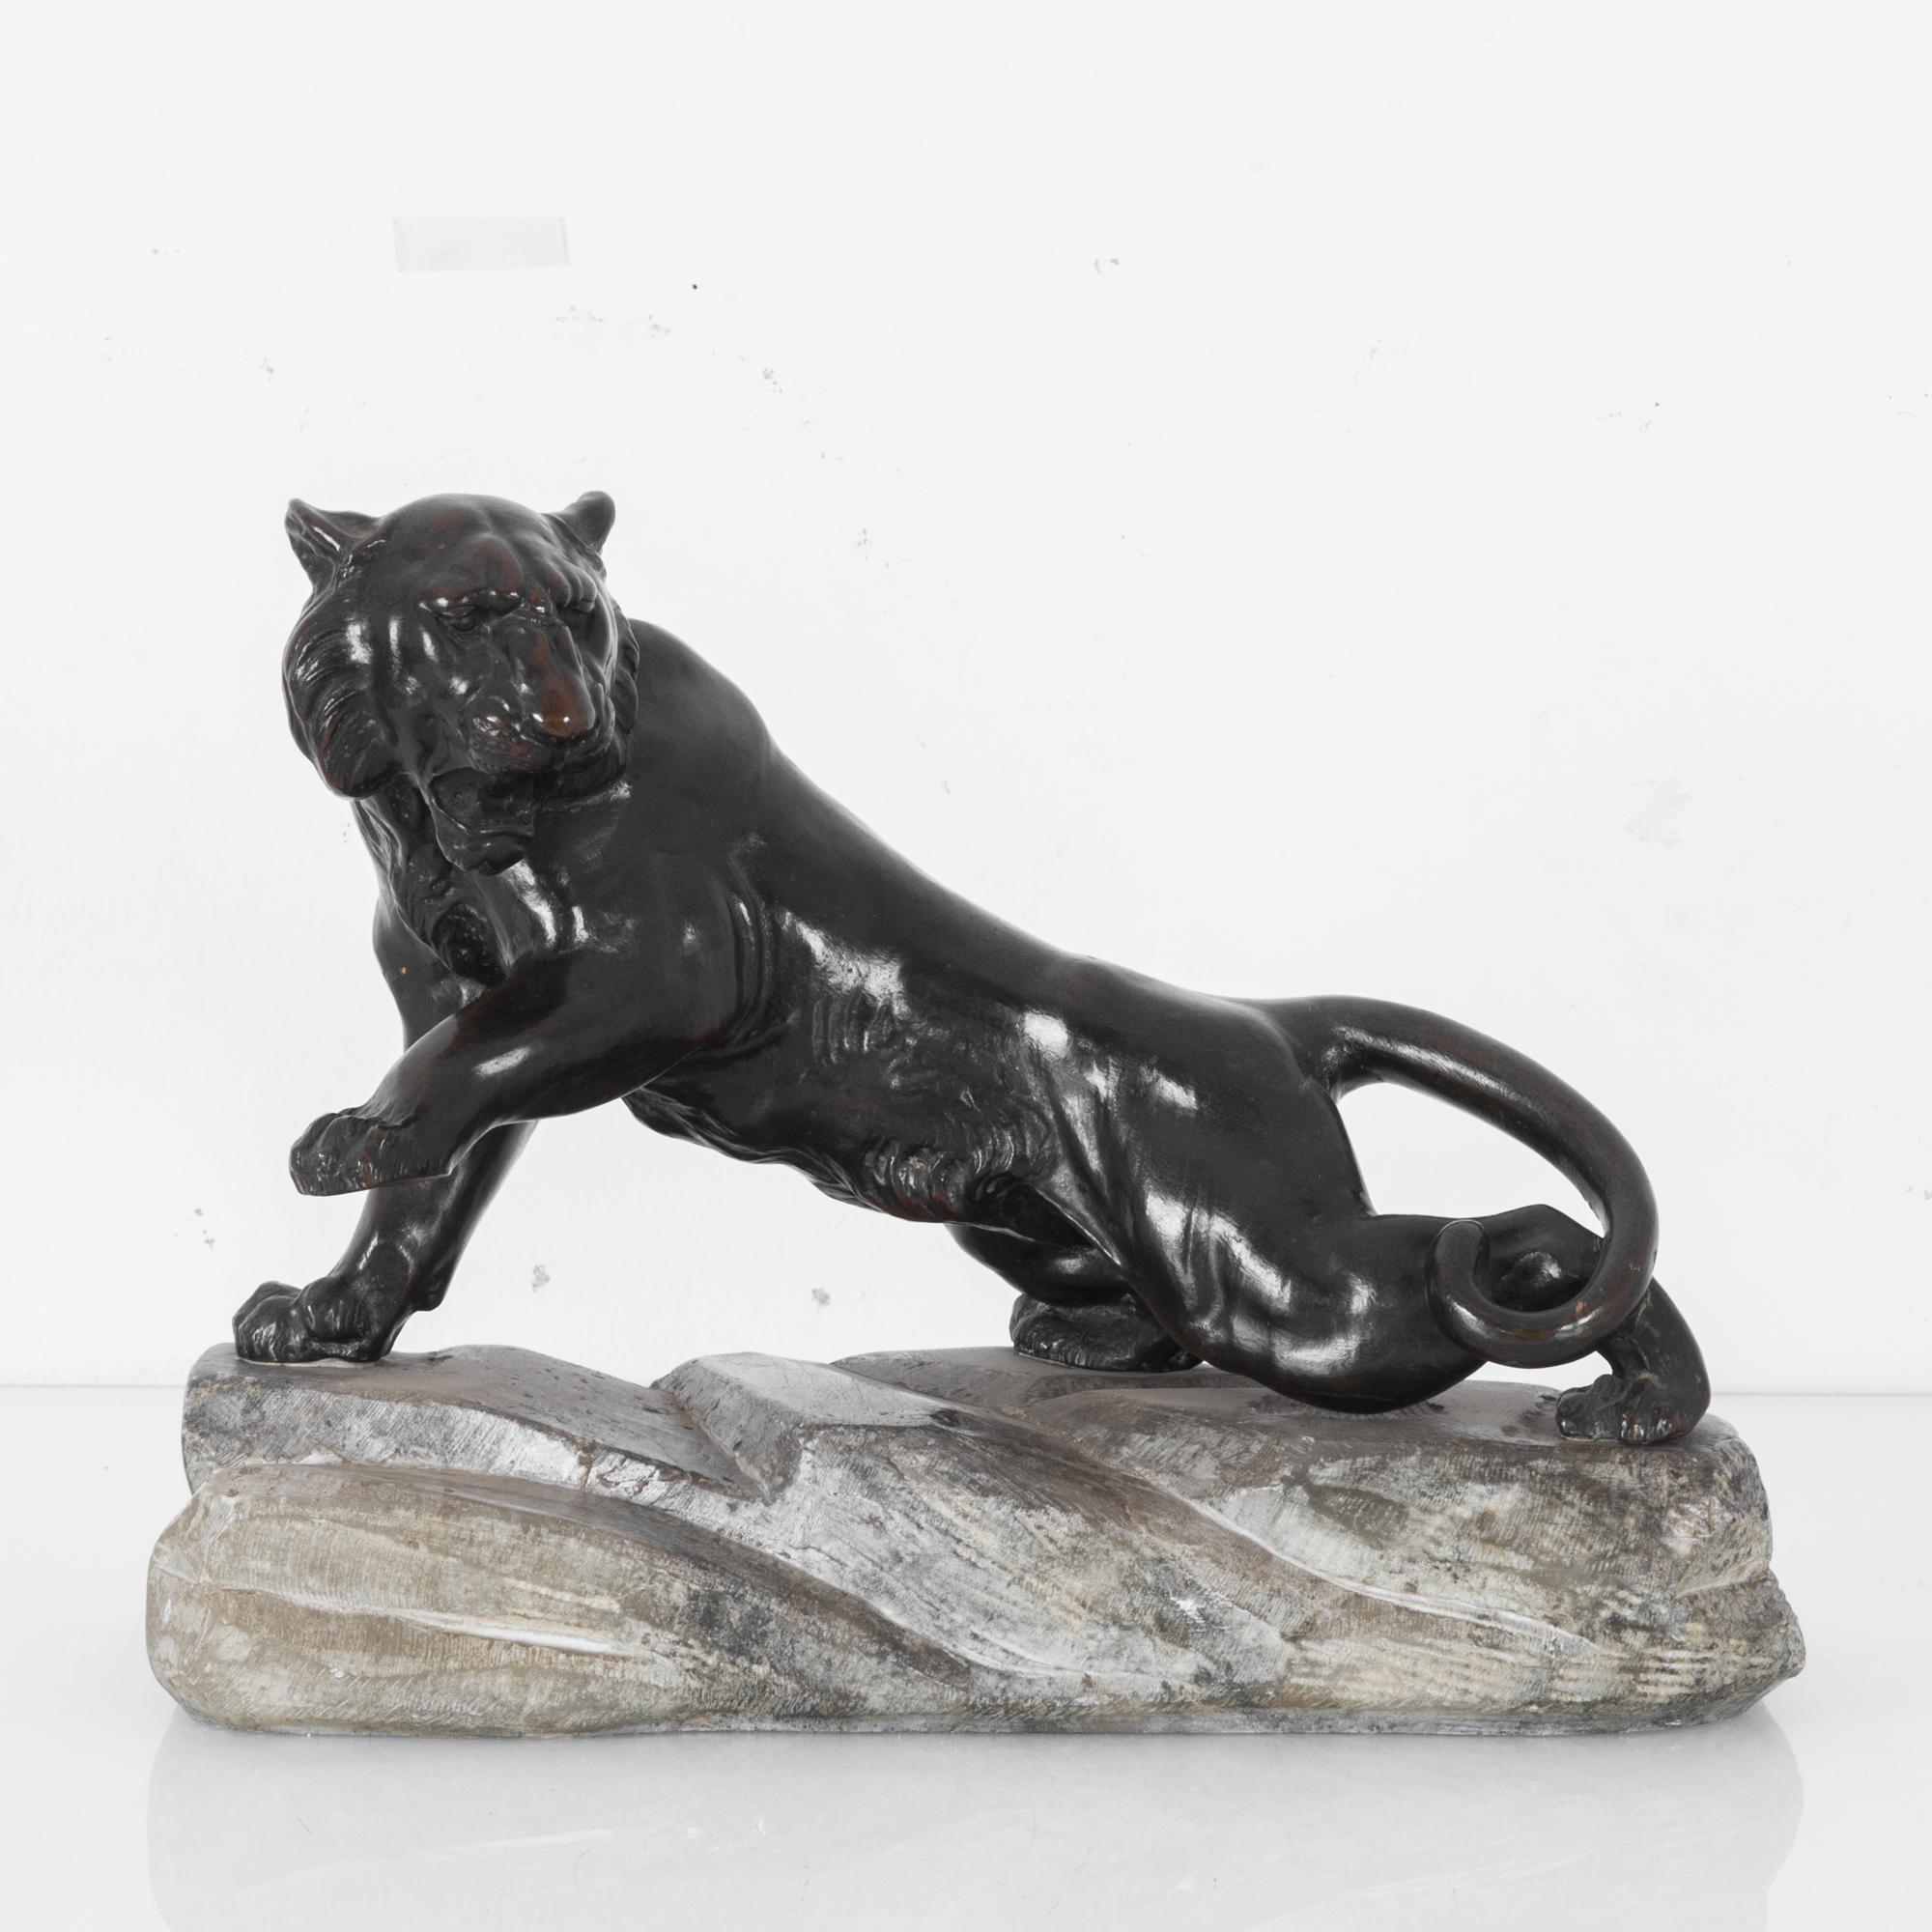 This bronze tiger sculpture on a stone was made in France, and will make an impressive statement in any interior space. The tiger, with open jaws, has its left front paw lifted, and its head looks over the left shoulder. The stone has a smooth